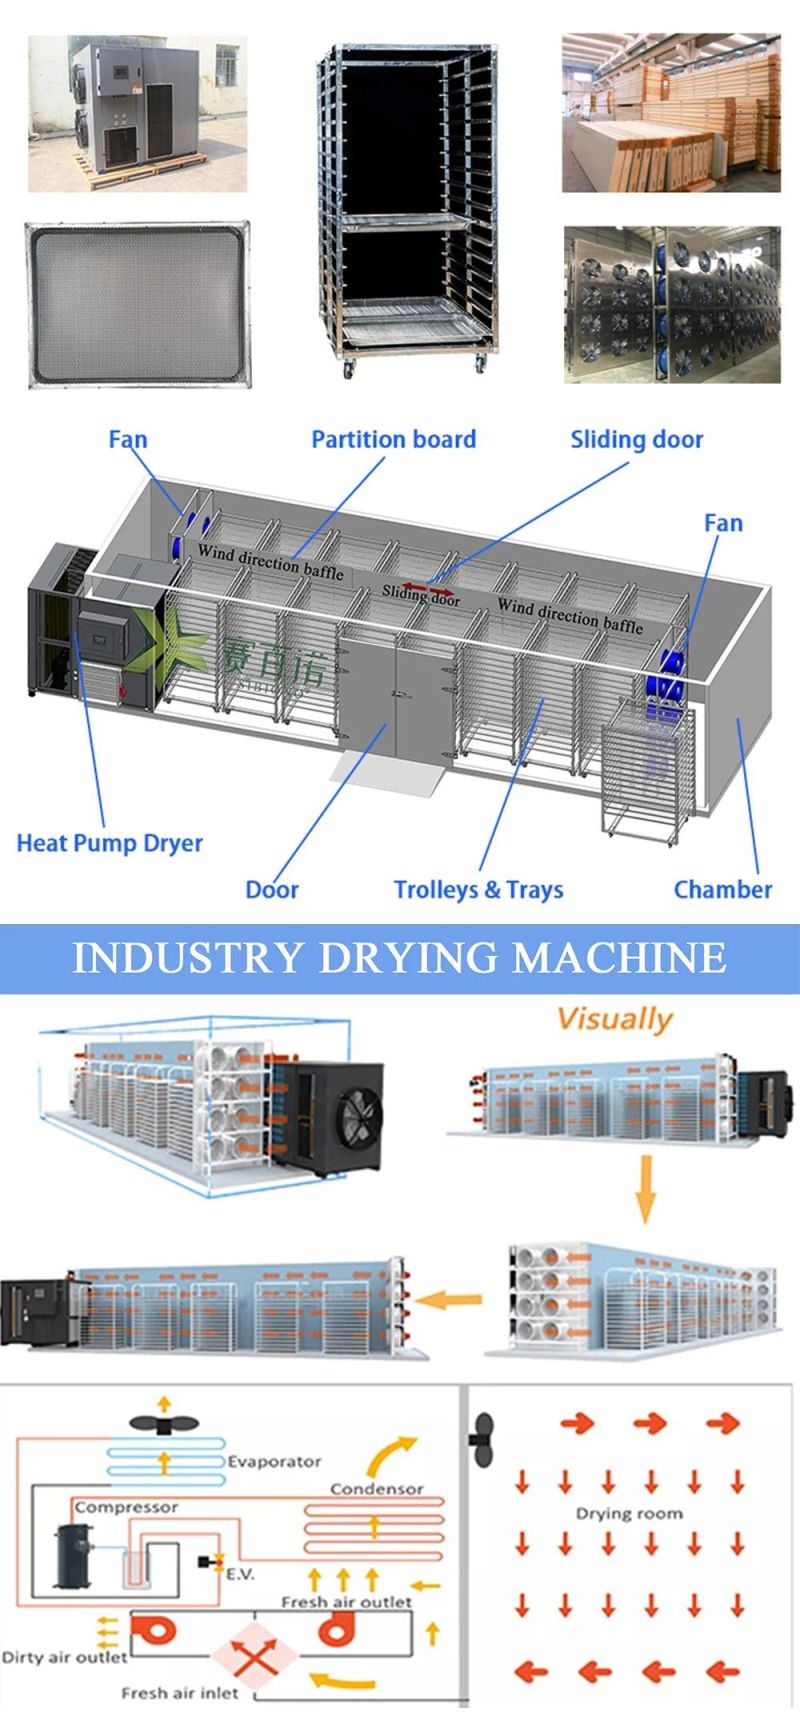 Hot Sale Ultra-High Capacity Heat Pump Dryer for Dehydrating Fruit,Vegetable, Fish,Spice,Noodles [Commercial Drying Machine, Drying Equipment, Dehydrator, Oven]